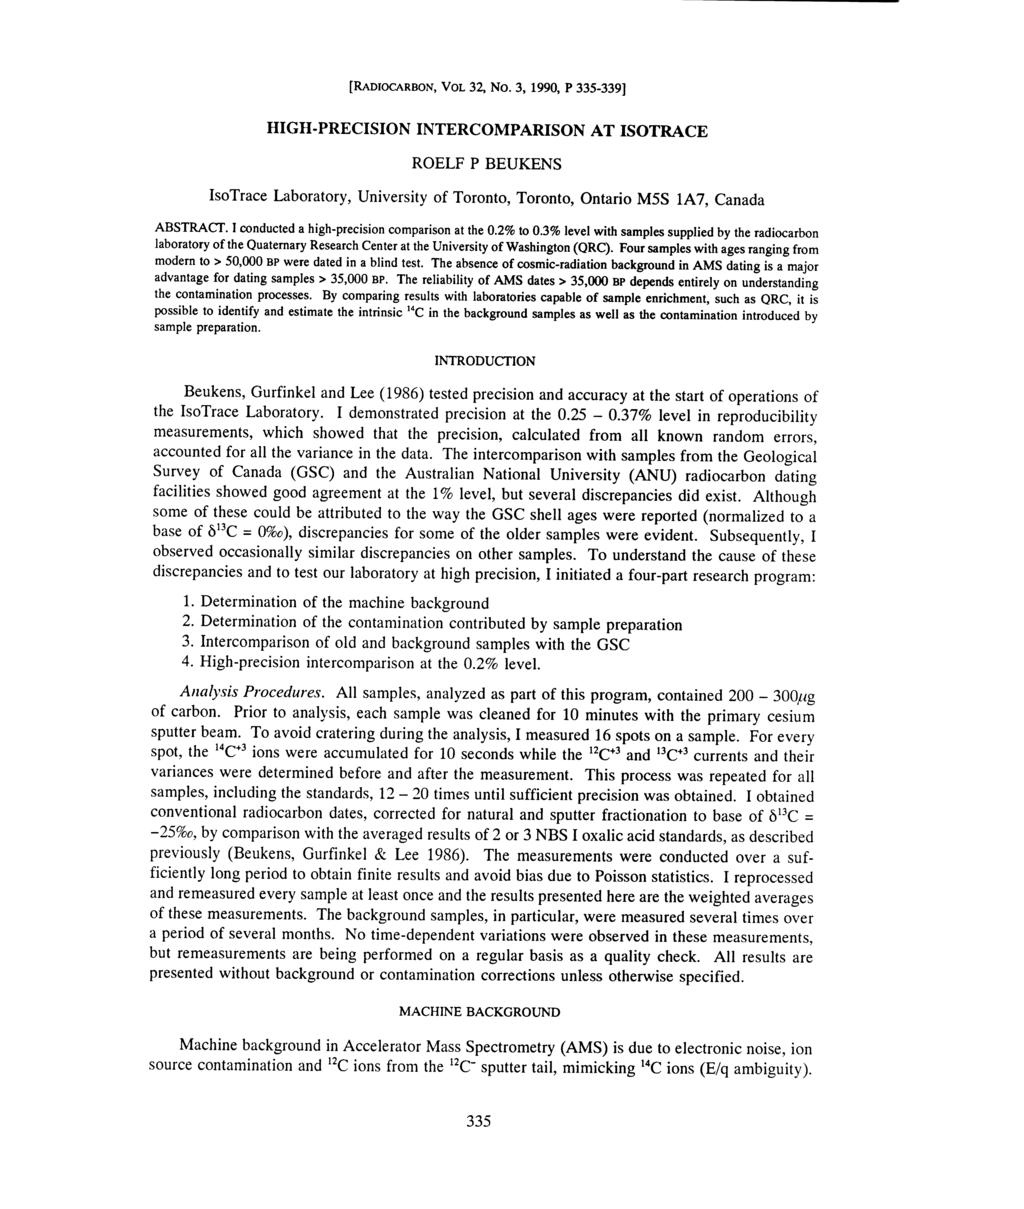 [RADIOCARBON, VOL 32, No. 3, 1990, P 335-339] HIGH-PRECISION INTERCOMPARISON AT ISOTRACE ROELF P BEUKENS IsoTrace Laboratory, University of Toronto, Toronto, Ontario M5S 1A7, Canada ABSTRACT.